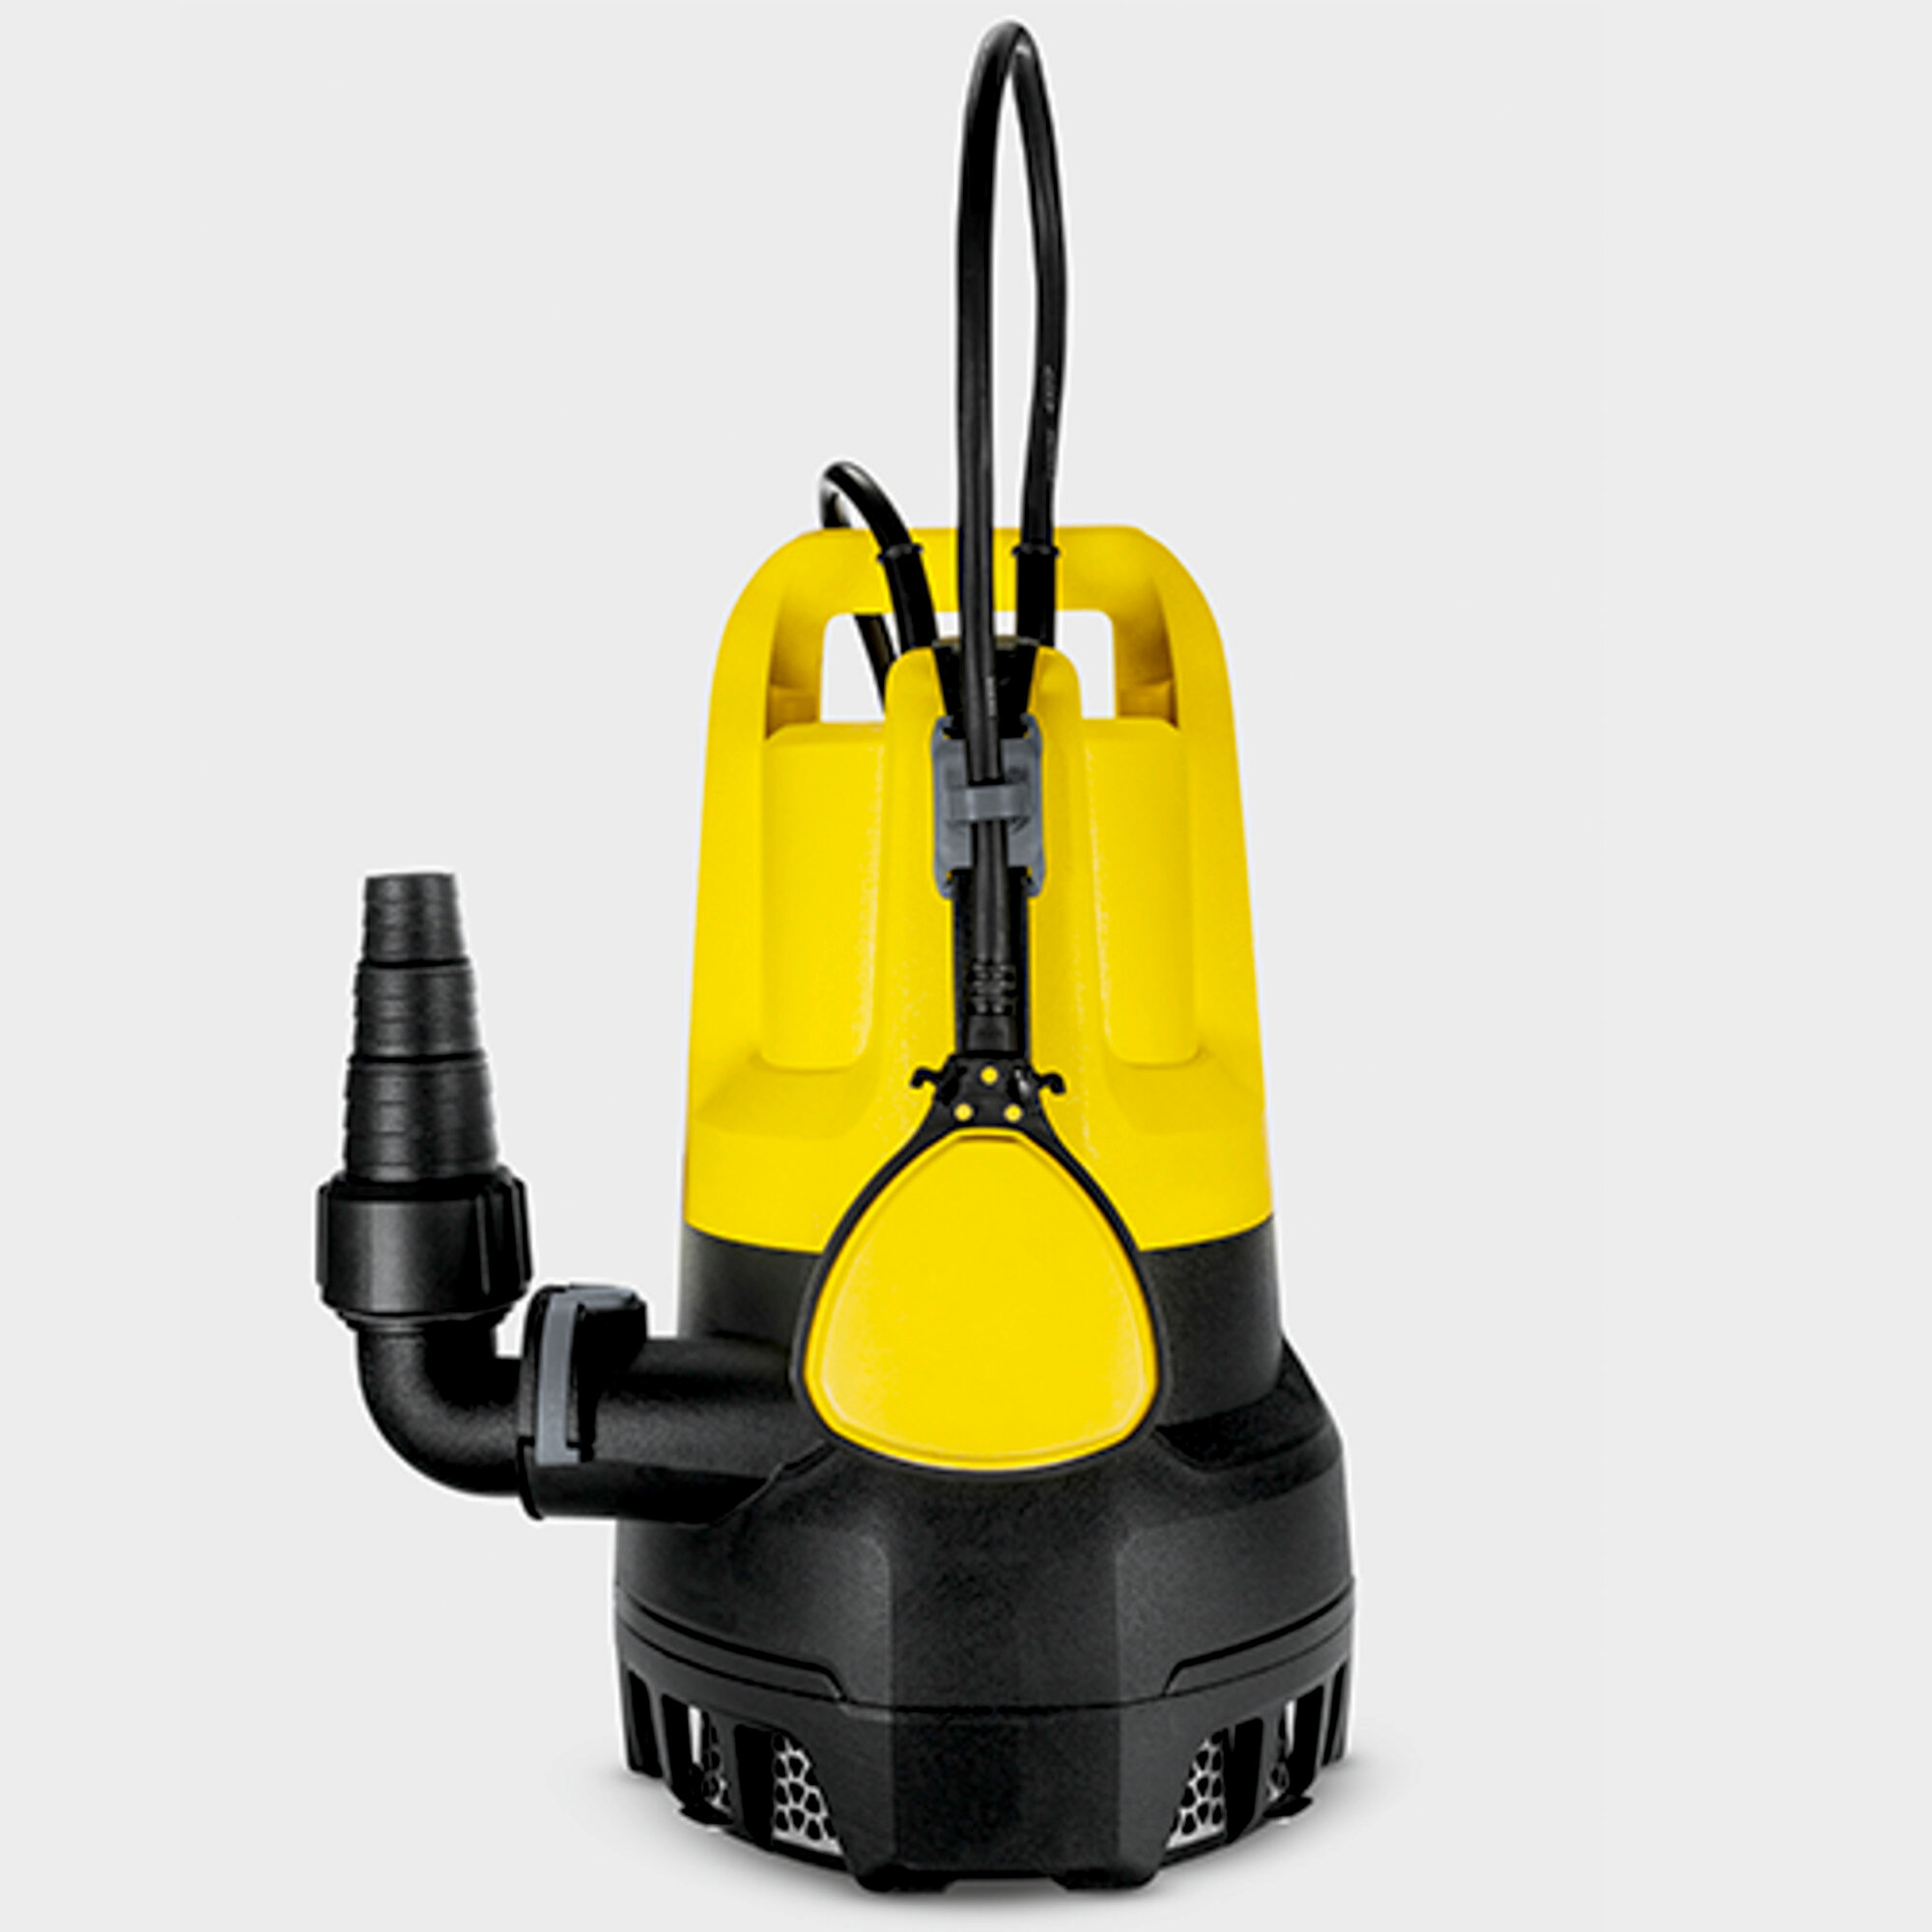 Buy KARCHER SUBMERSIBLE DIRTY WATER PUMP SP 7 DIRT 15500L/H KR16455040 Online in Doha Qatar